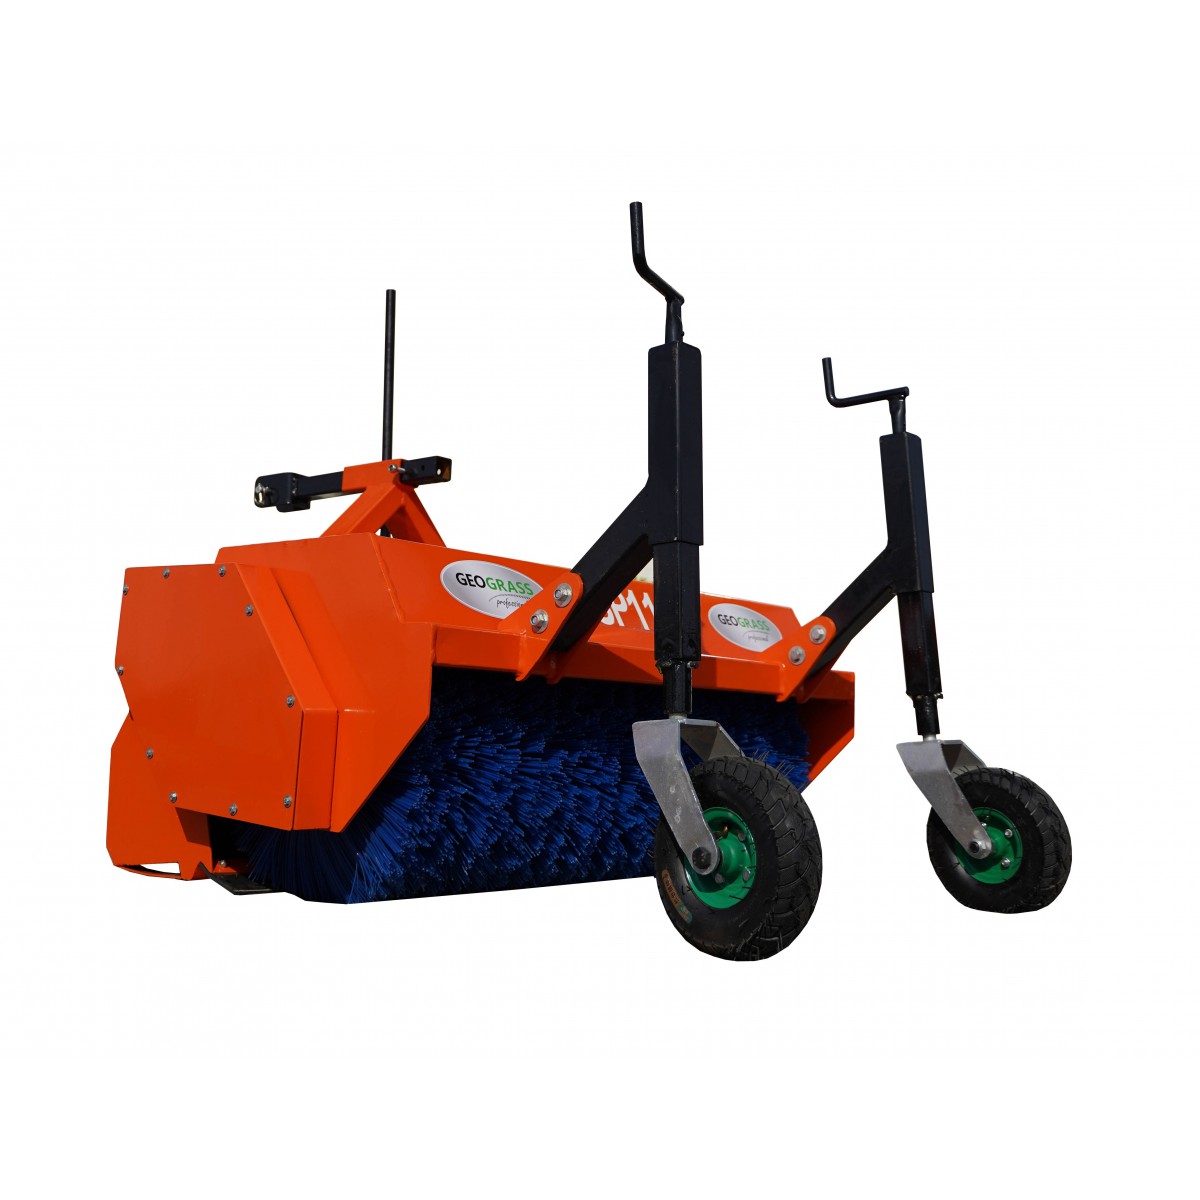 SP115 sweeper for Geograss tractor